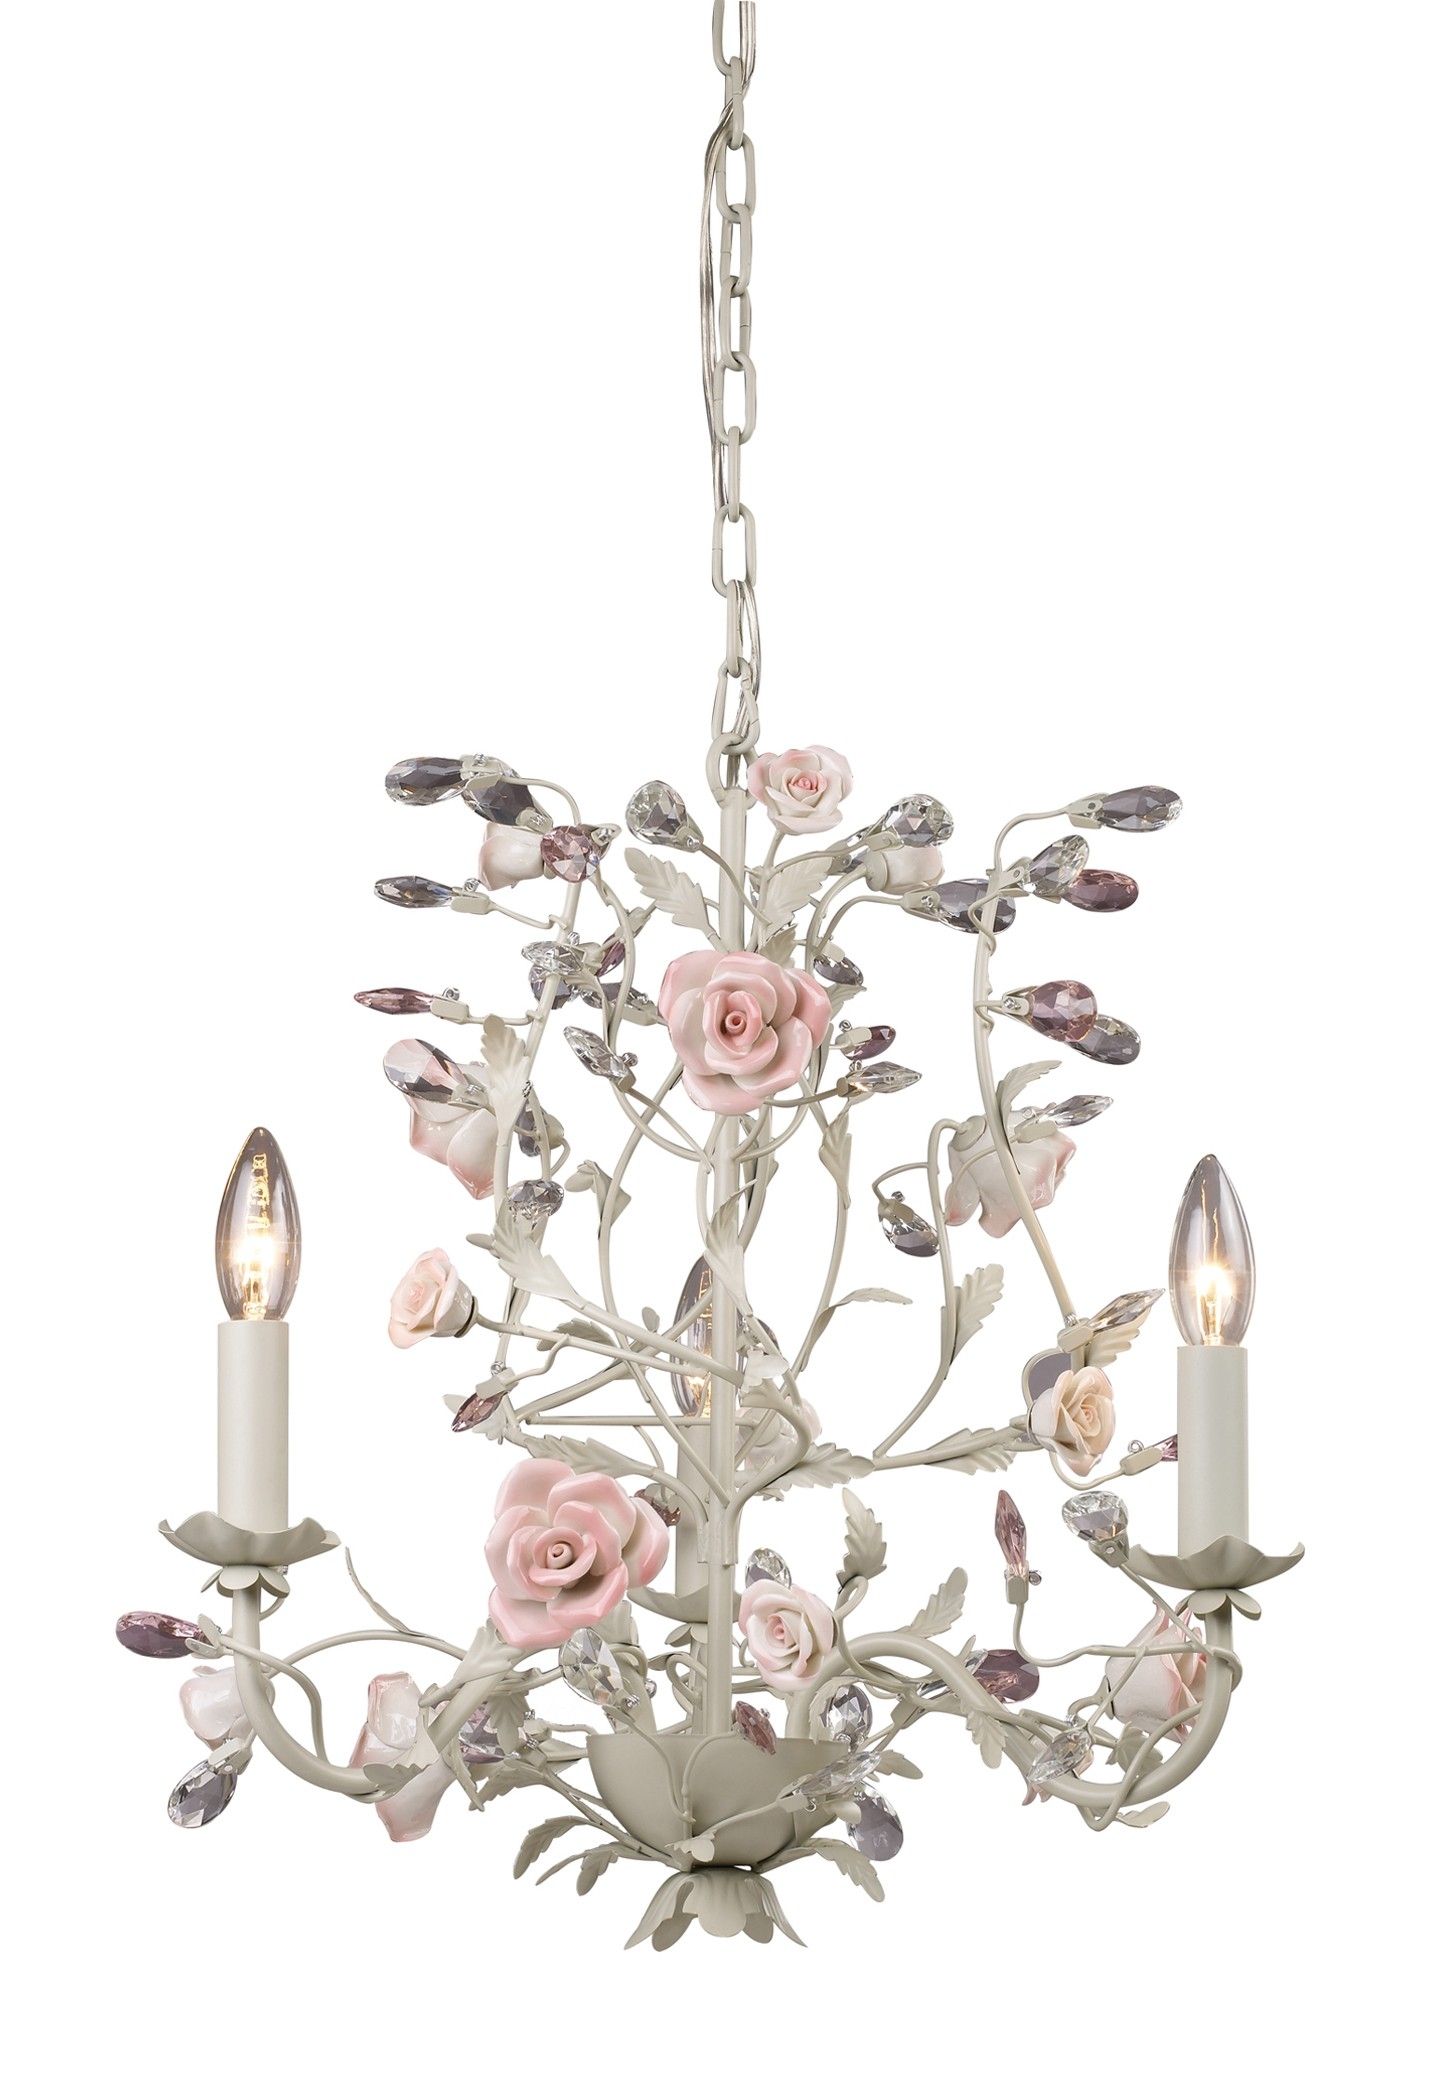 Light Flower Chandelier Would Love This For My Office Throughout Large Cream Chandelier (Photo 5 of 12)